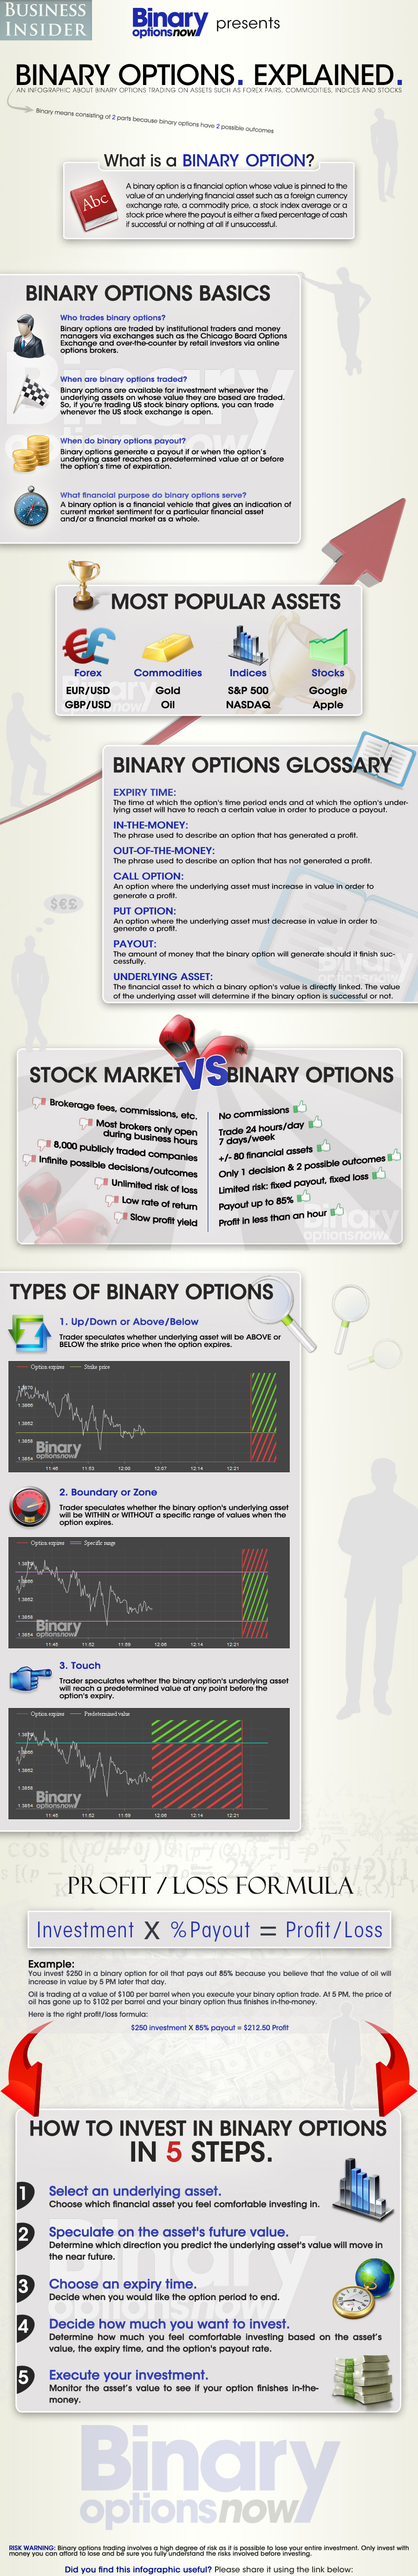 How to start a binary options business